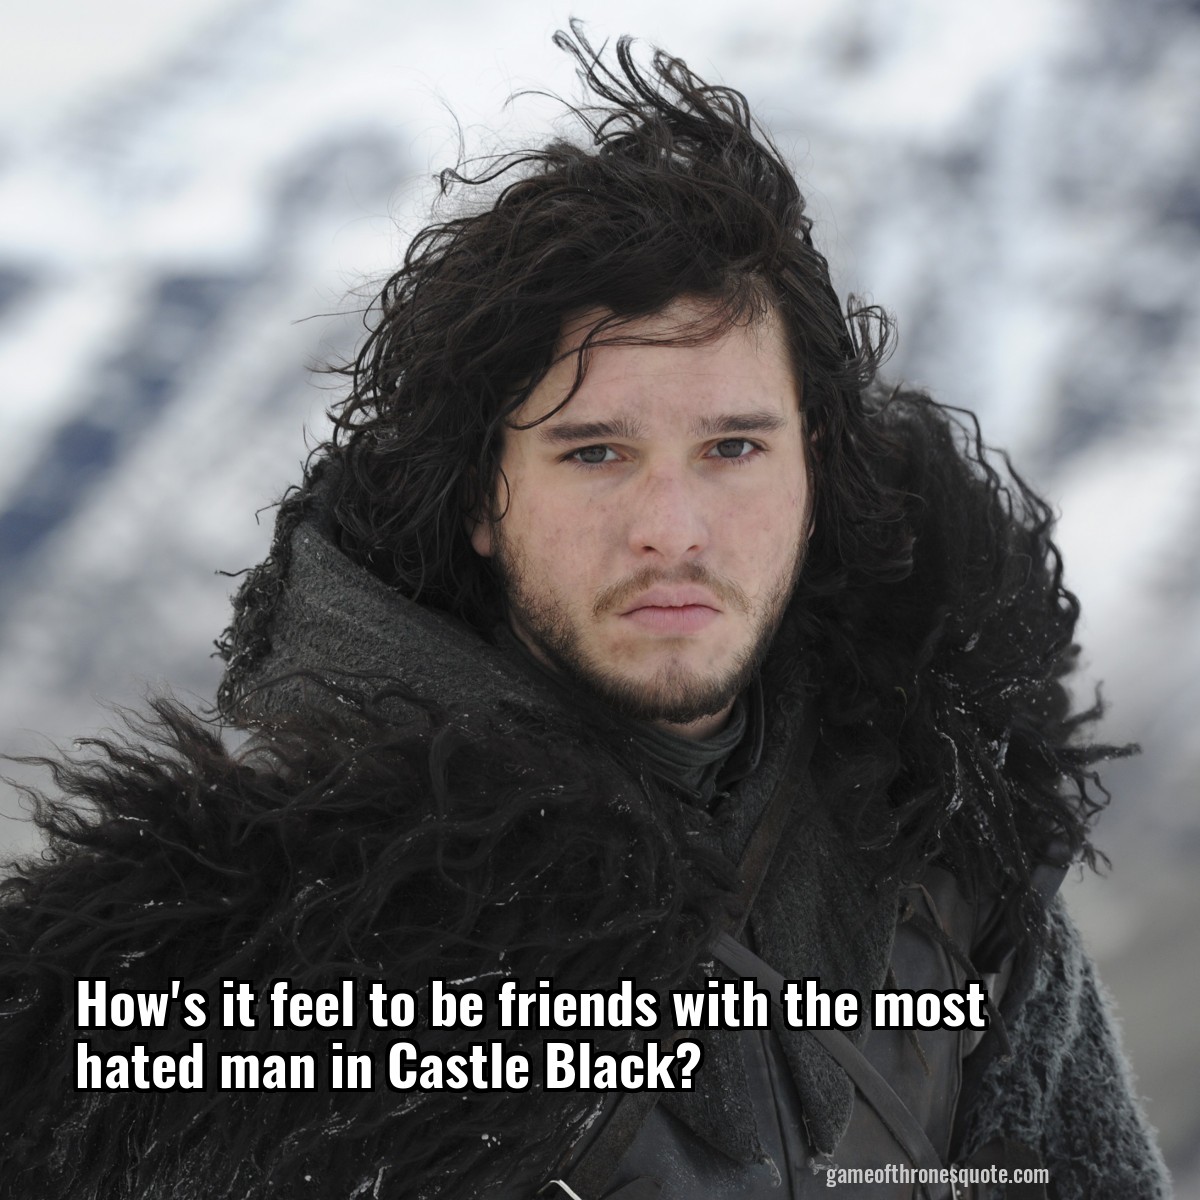 How's it feel to be friends with the most hated man in Castle Black?